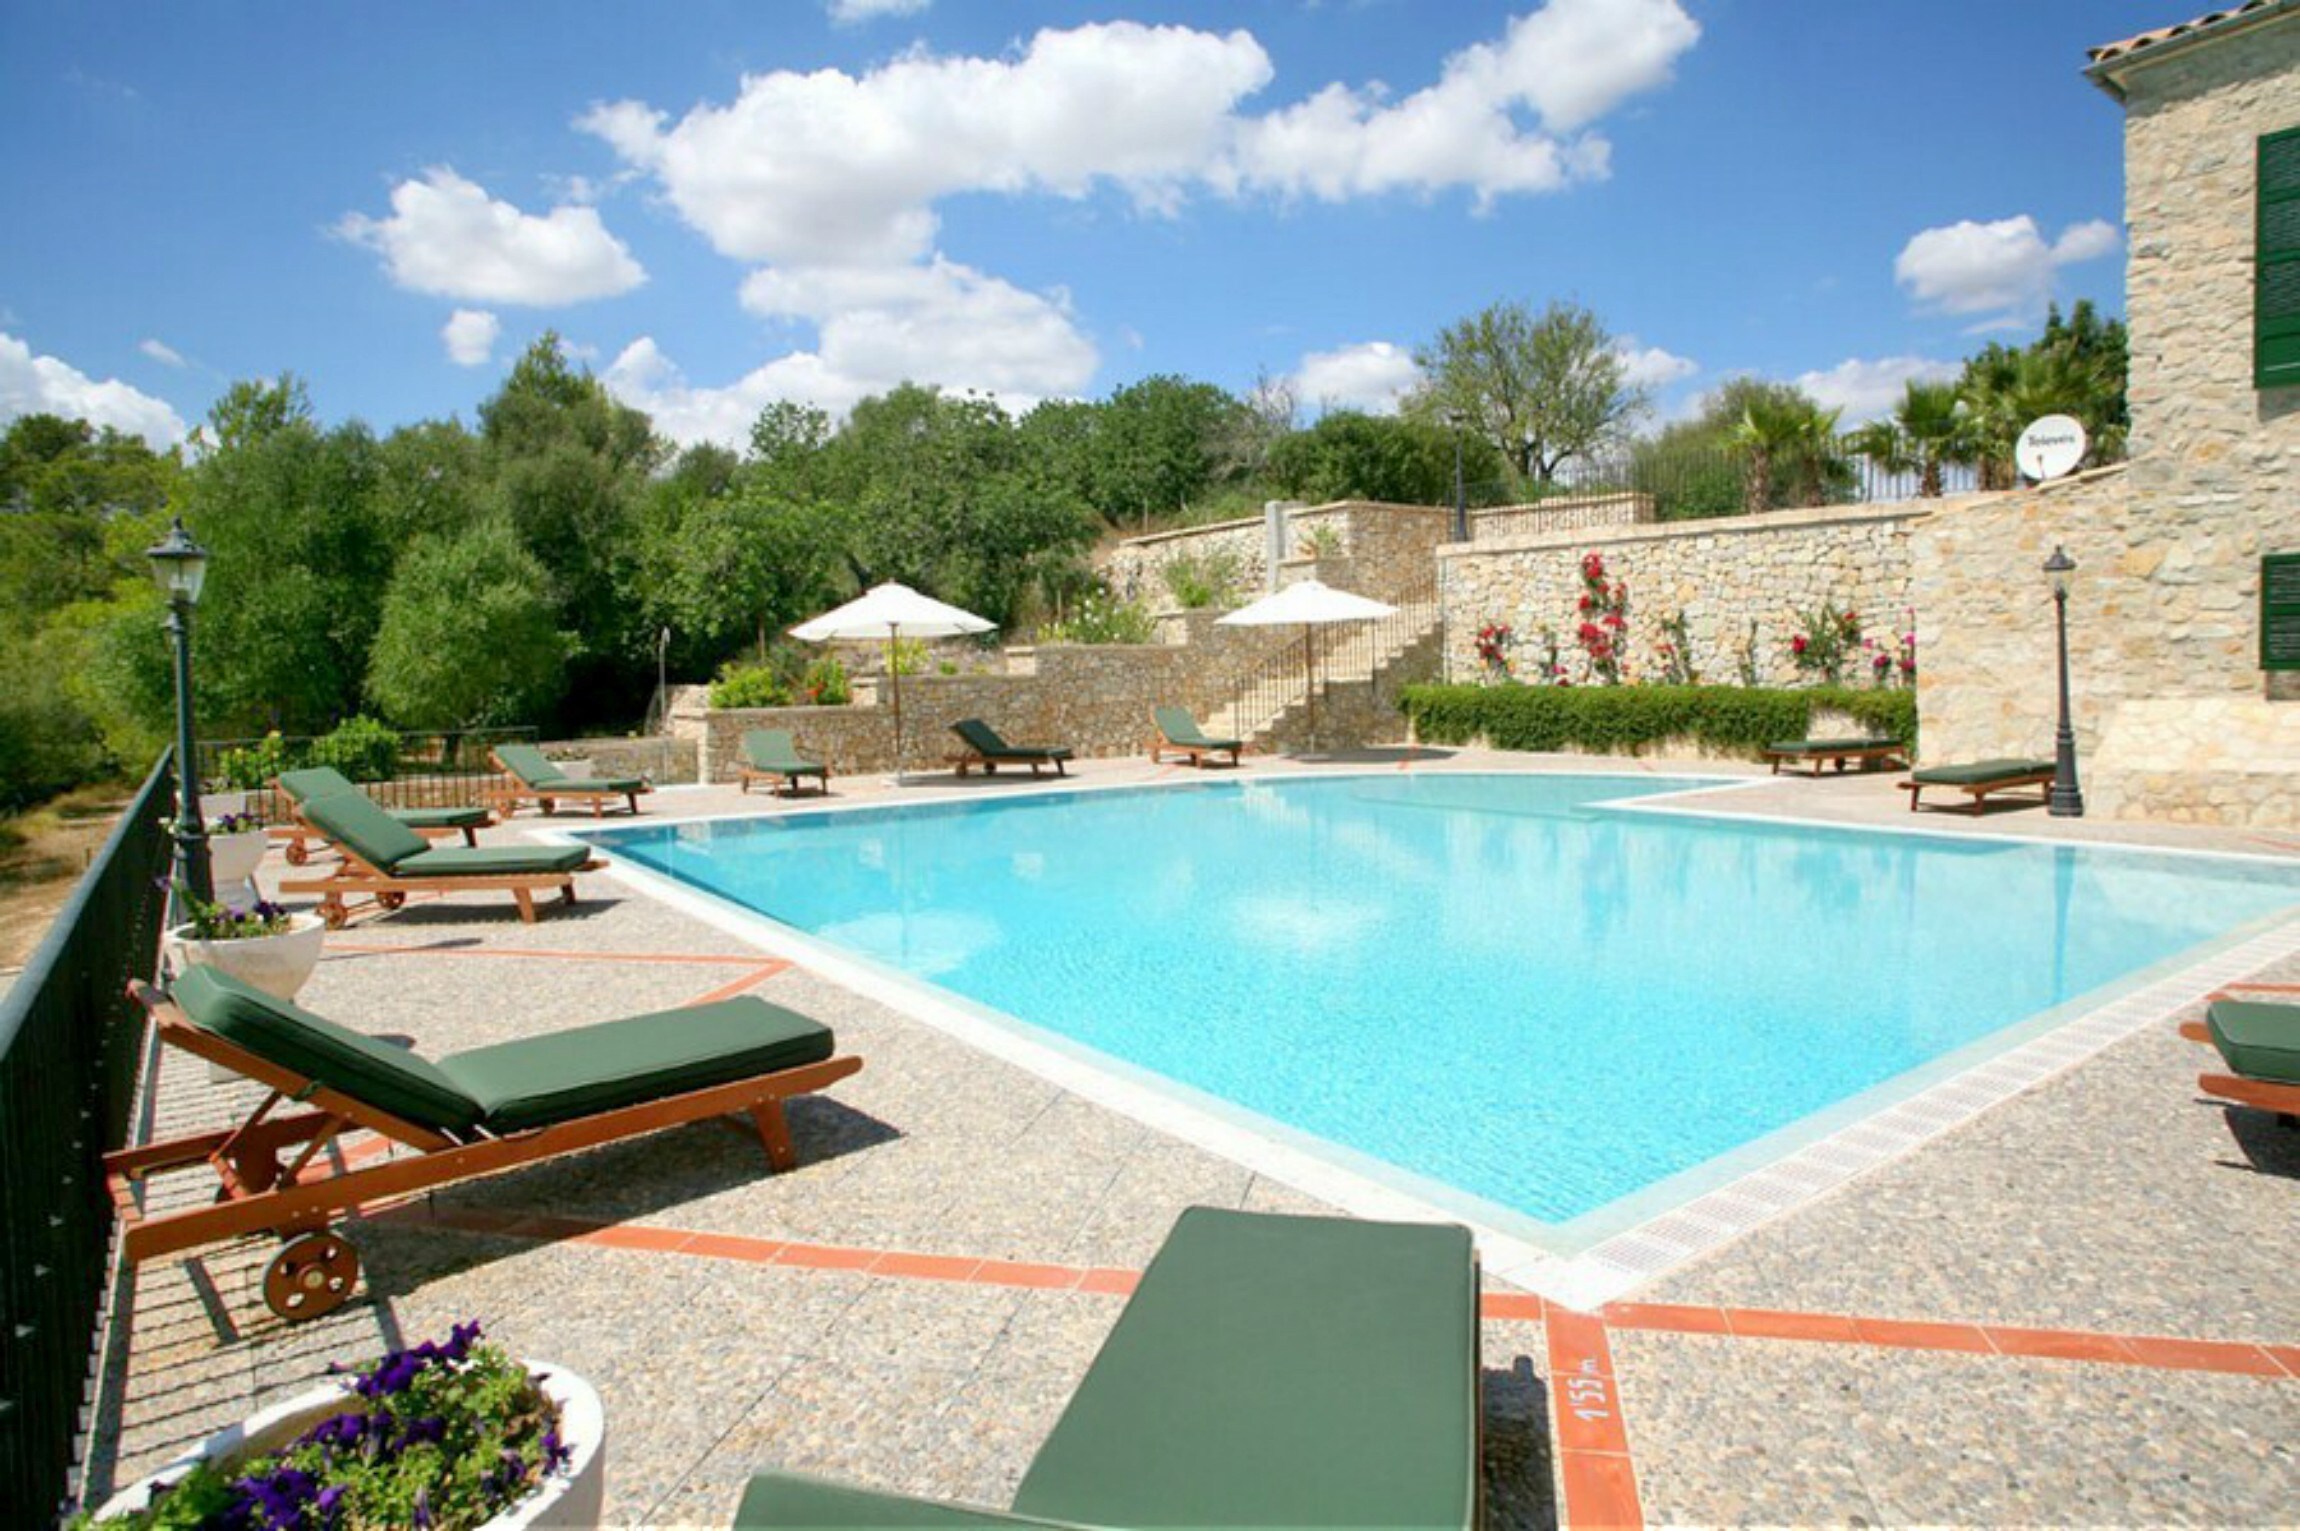 The villa has a large pool for 12 persons